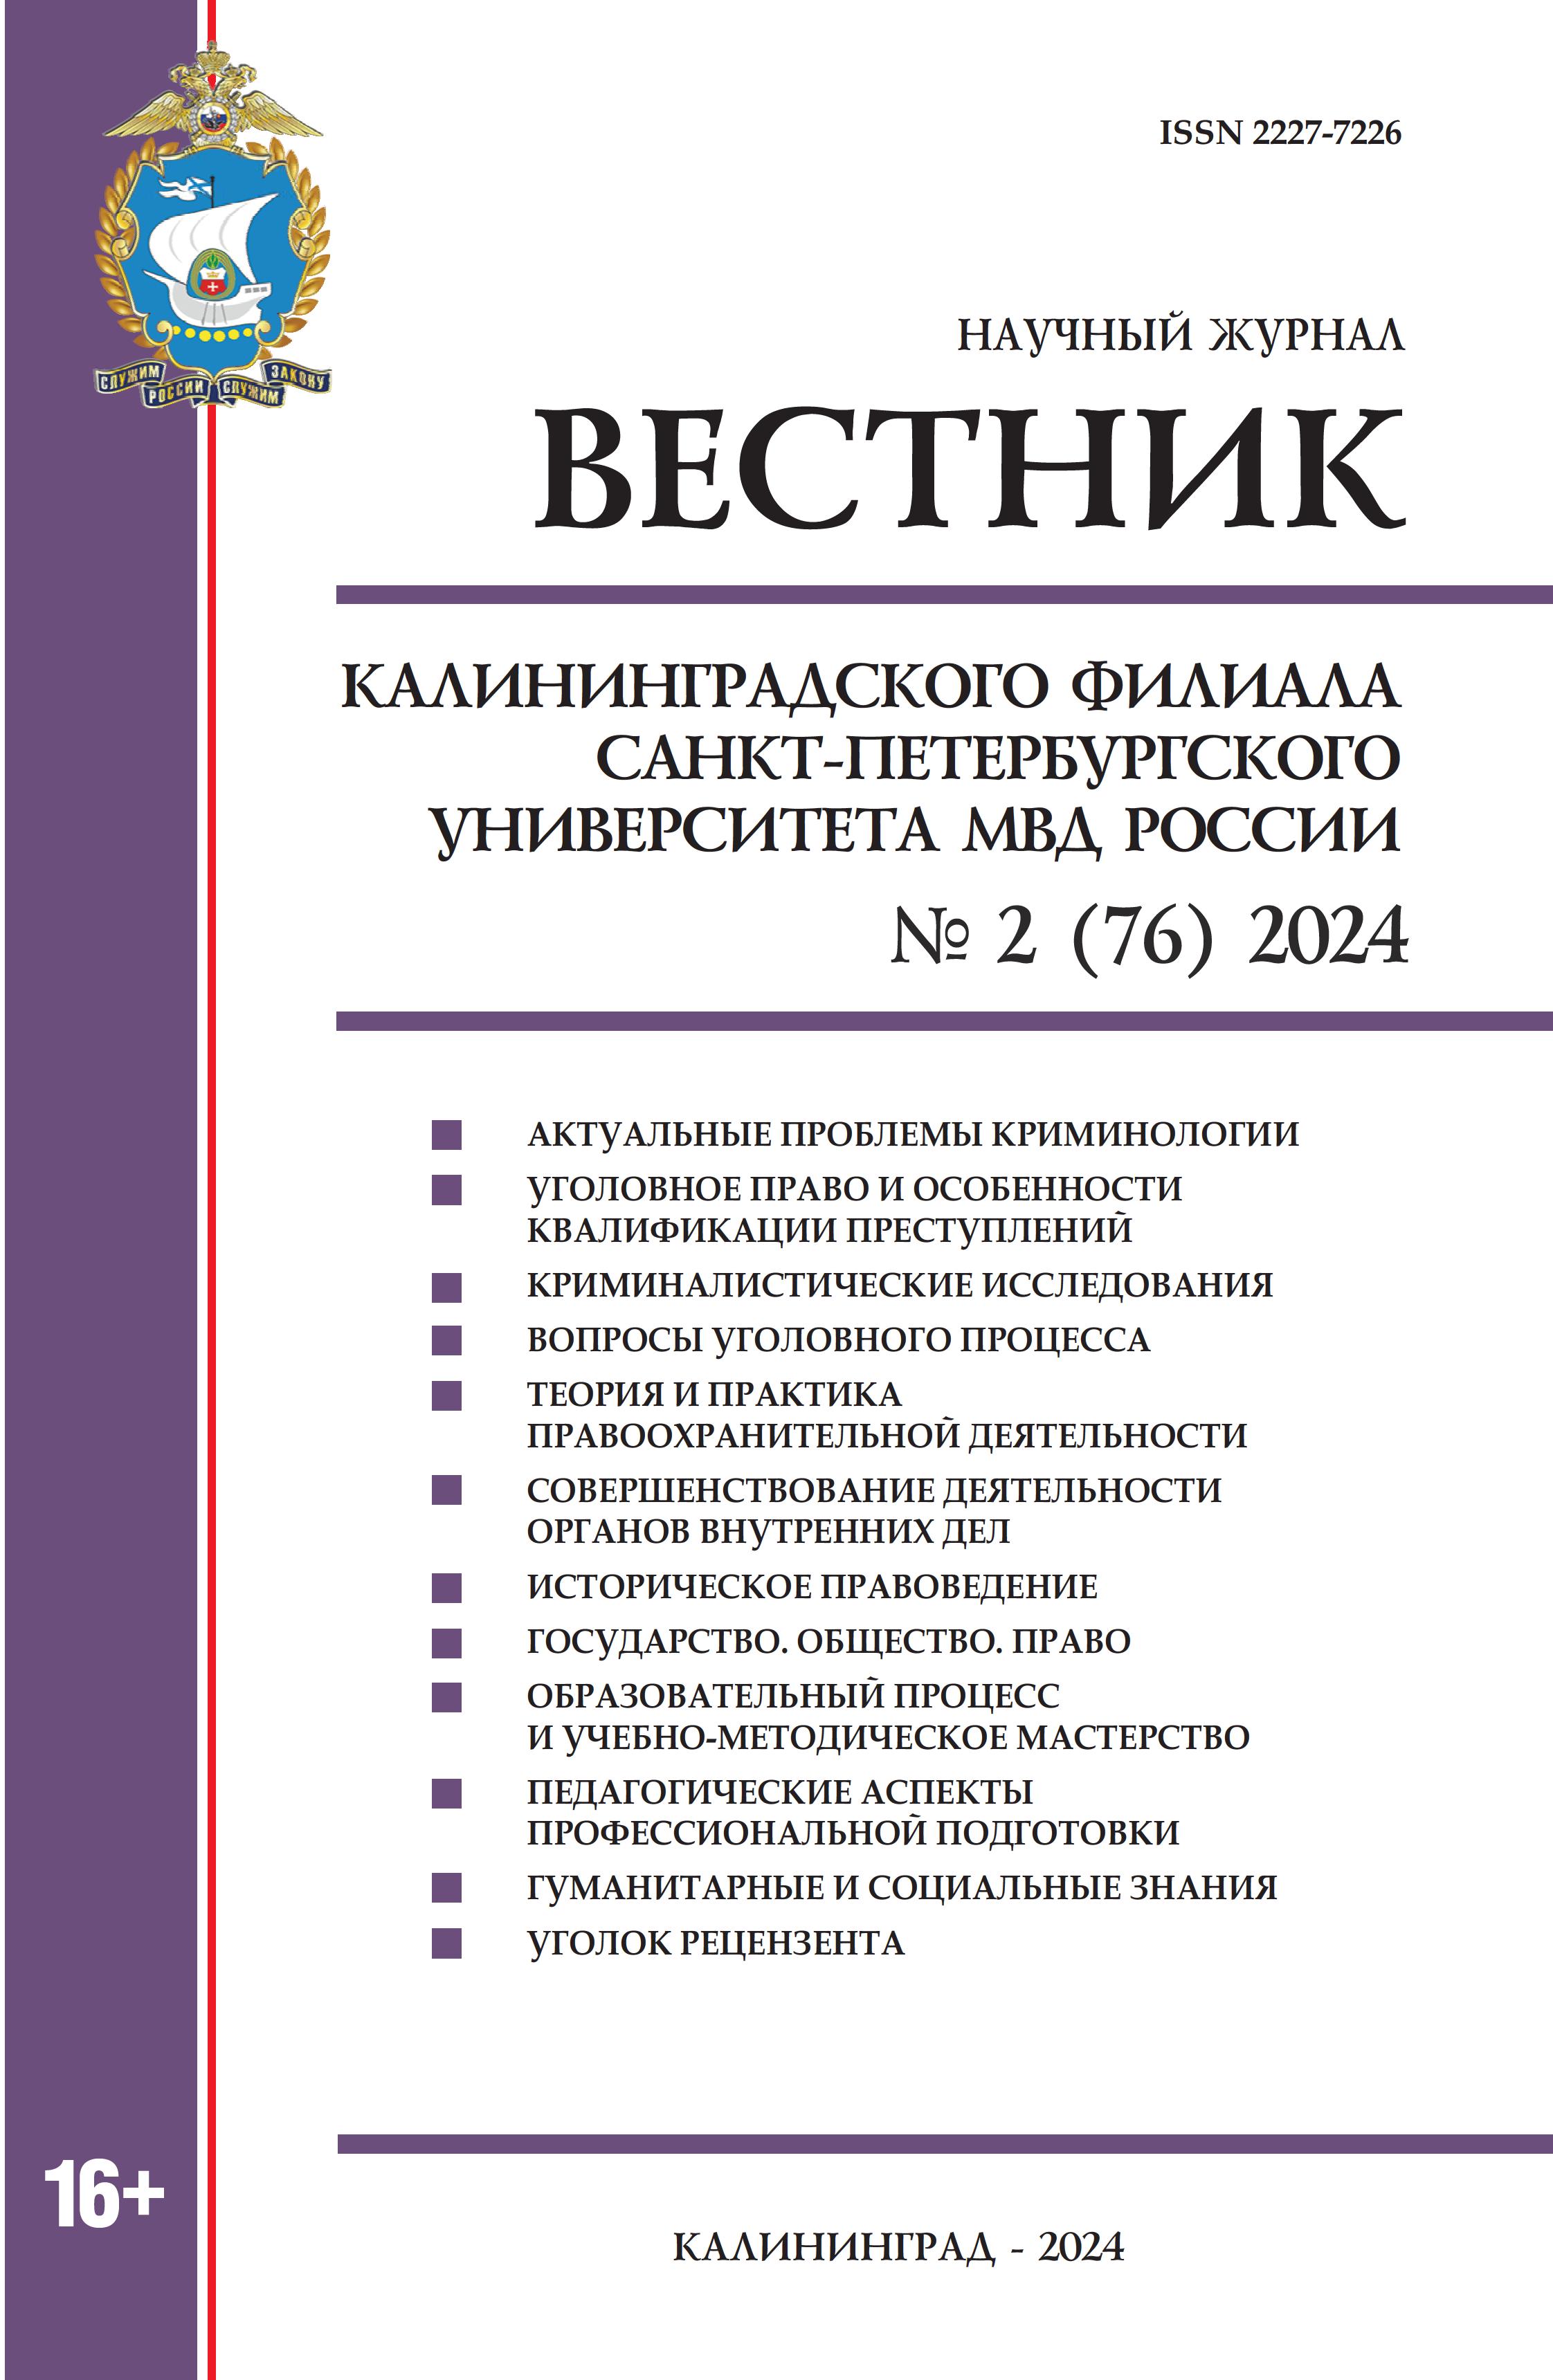                         Openness in the system of principles of criminal justice in Russia
            